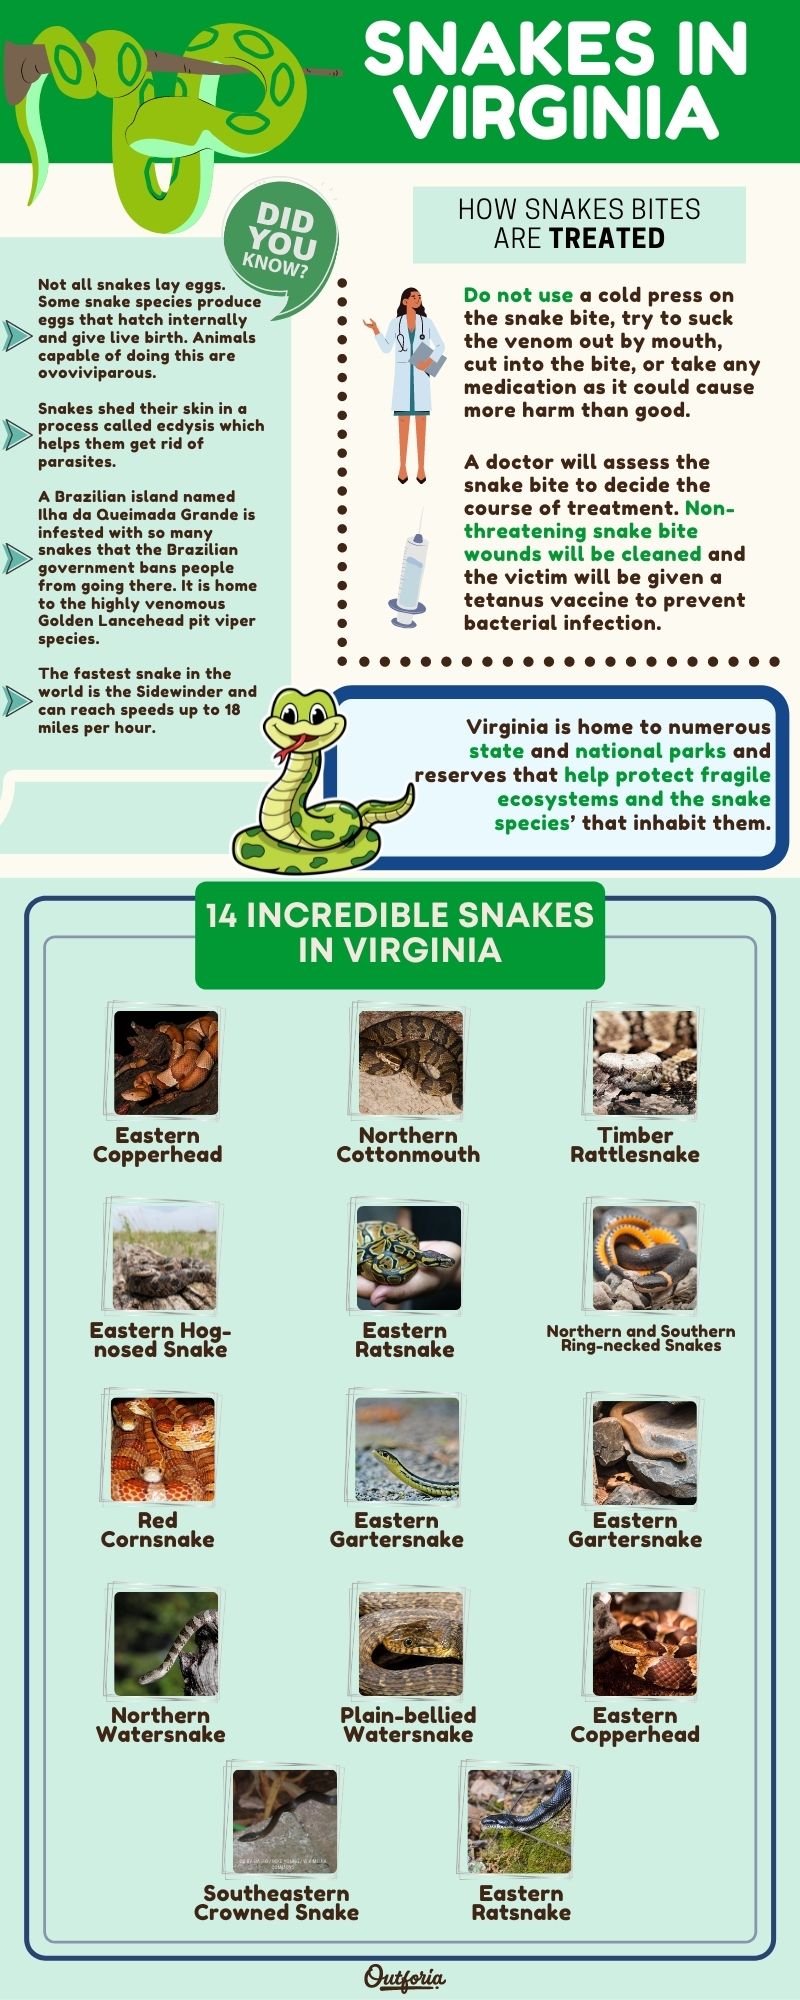 Snakes in virginia chart